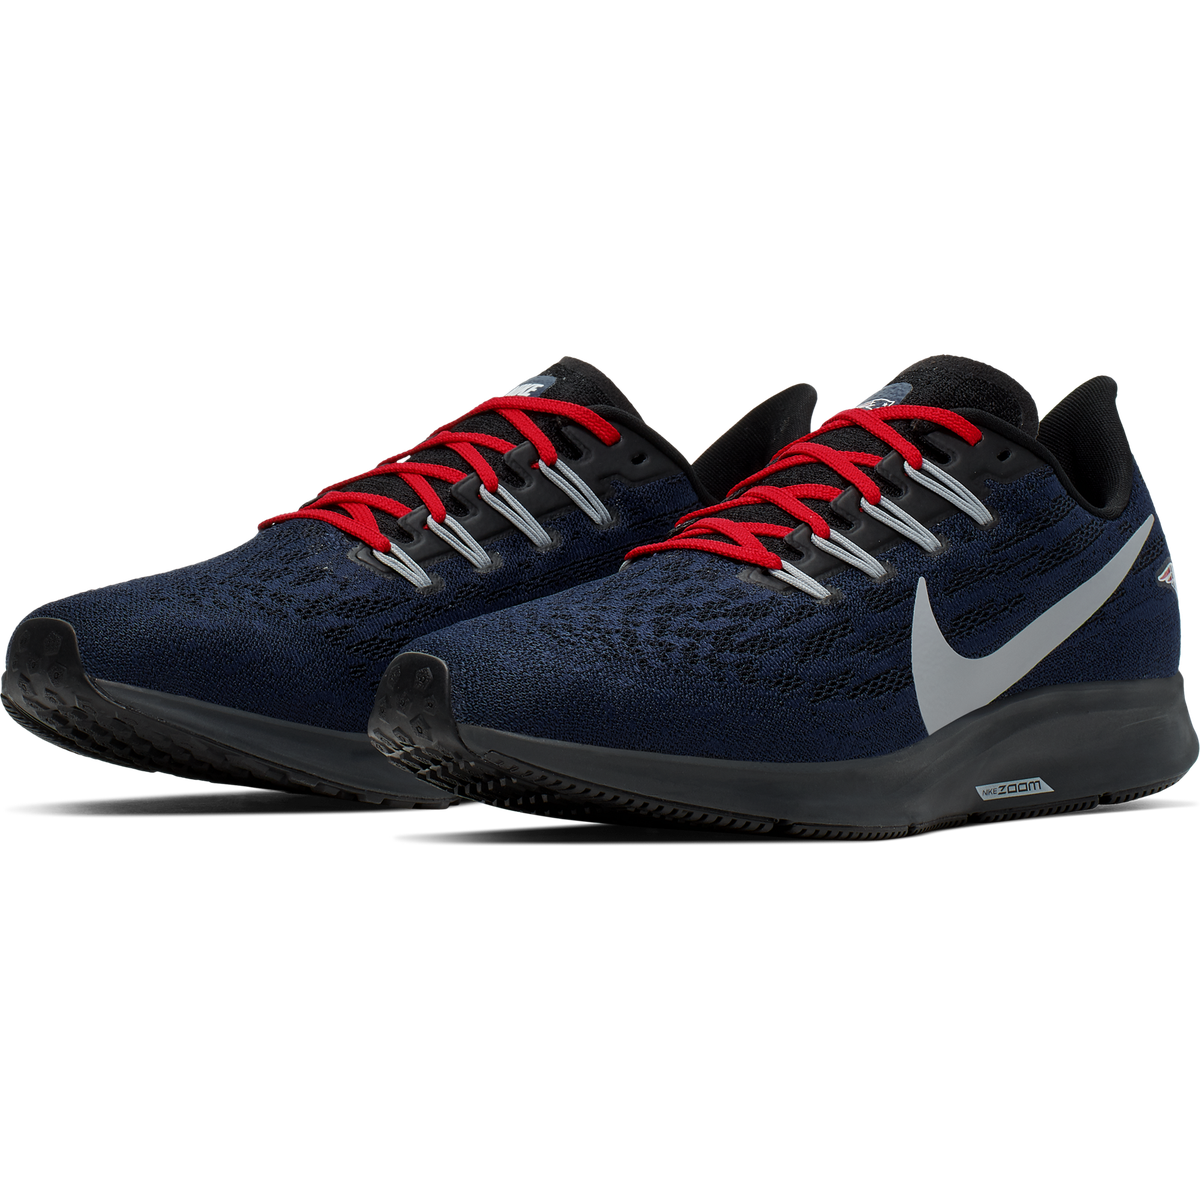 Nike the 36 New England Patriots collection! - Pats Pulpit